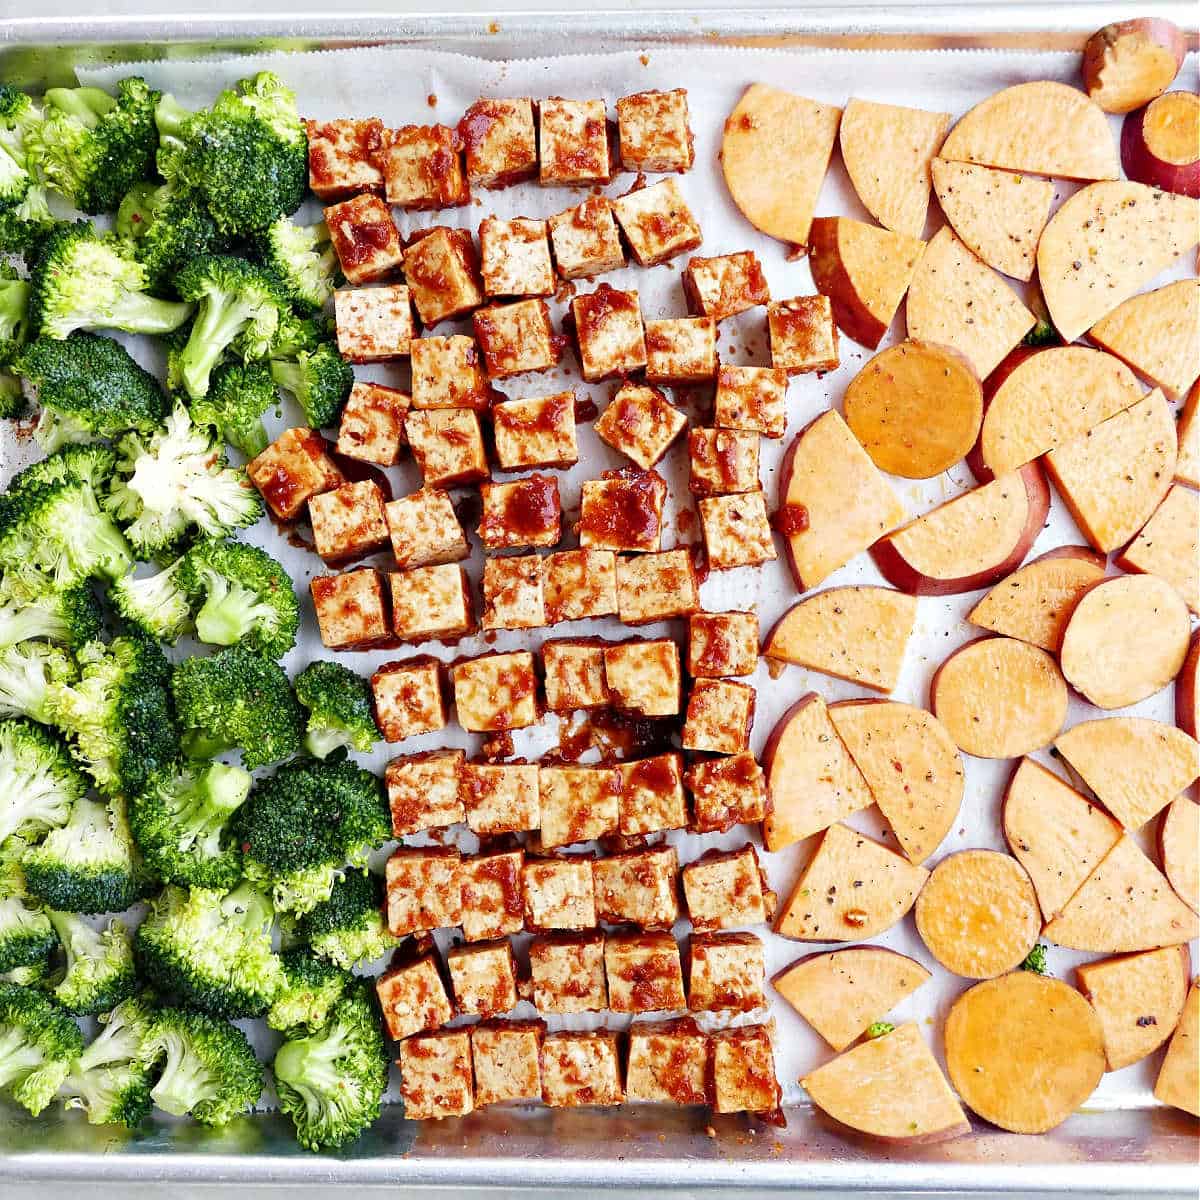 Broccoli, yams, and bbq marinated tofu on a baking sheet before cooking.